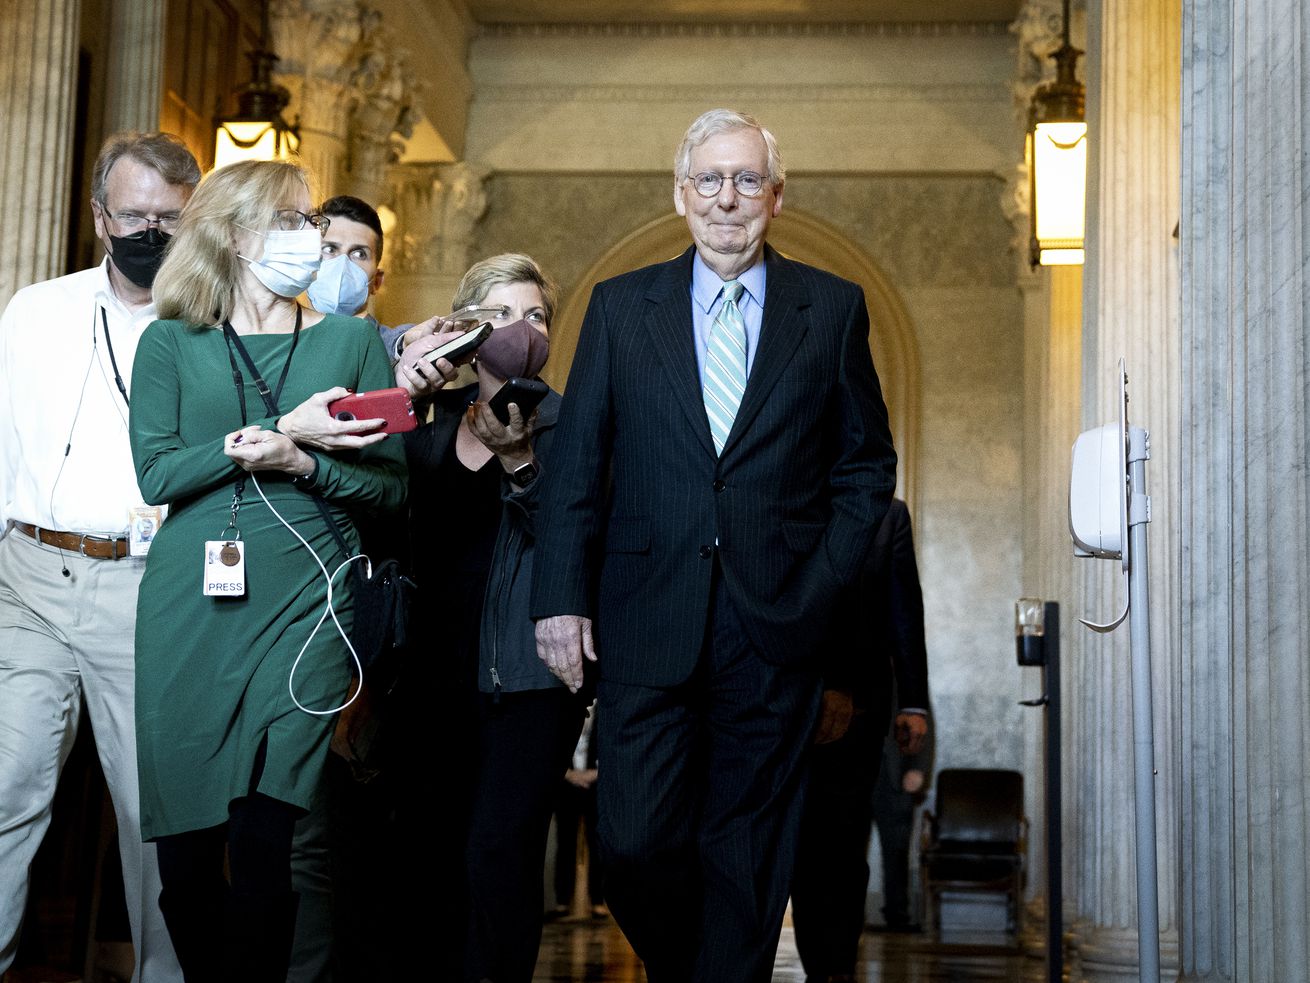 The debt ceiling fight is far from over